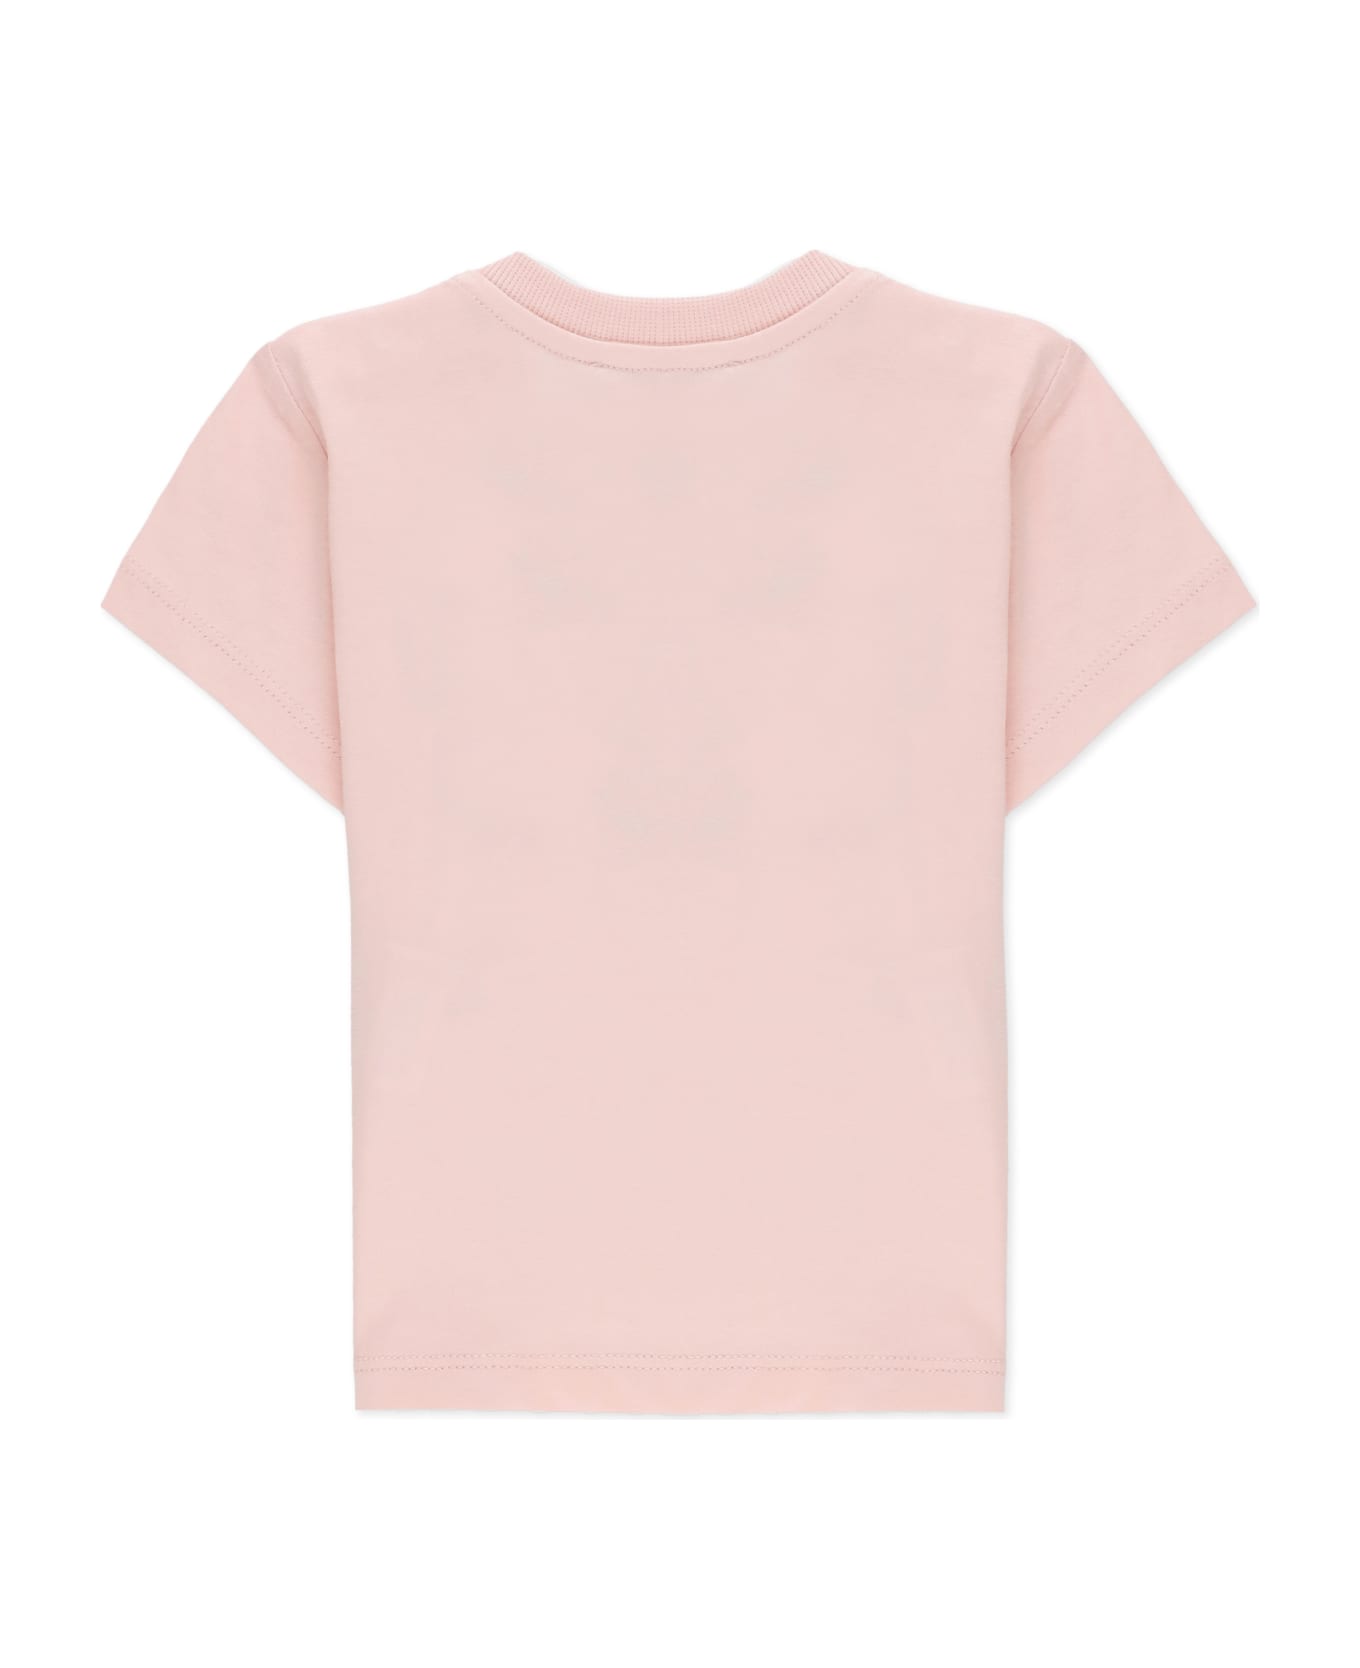 Moschino T-shirt With Print - Pink